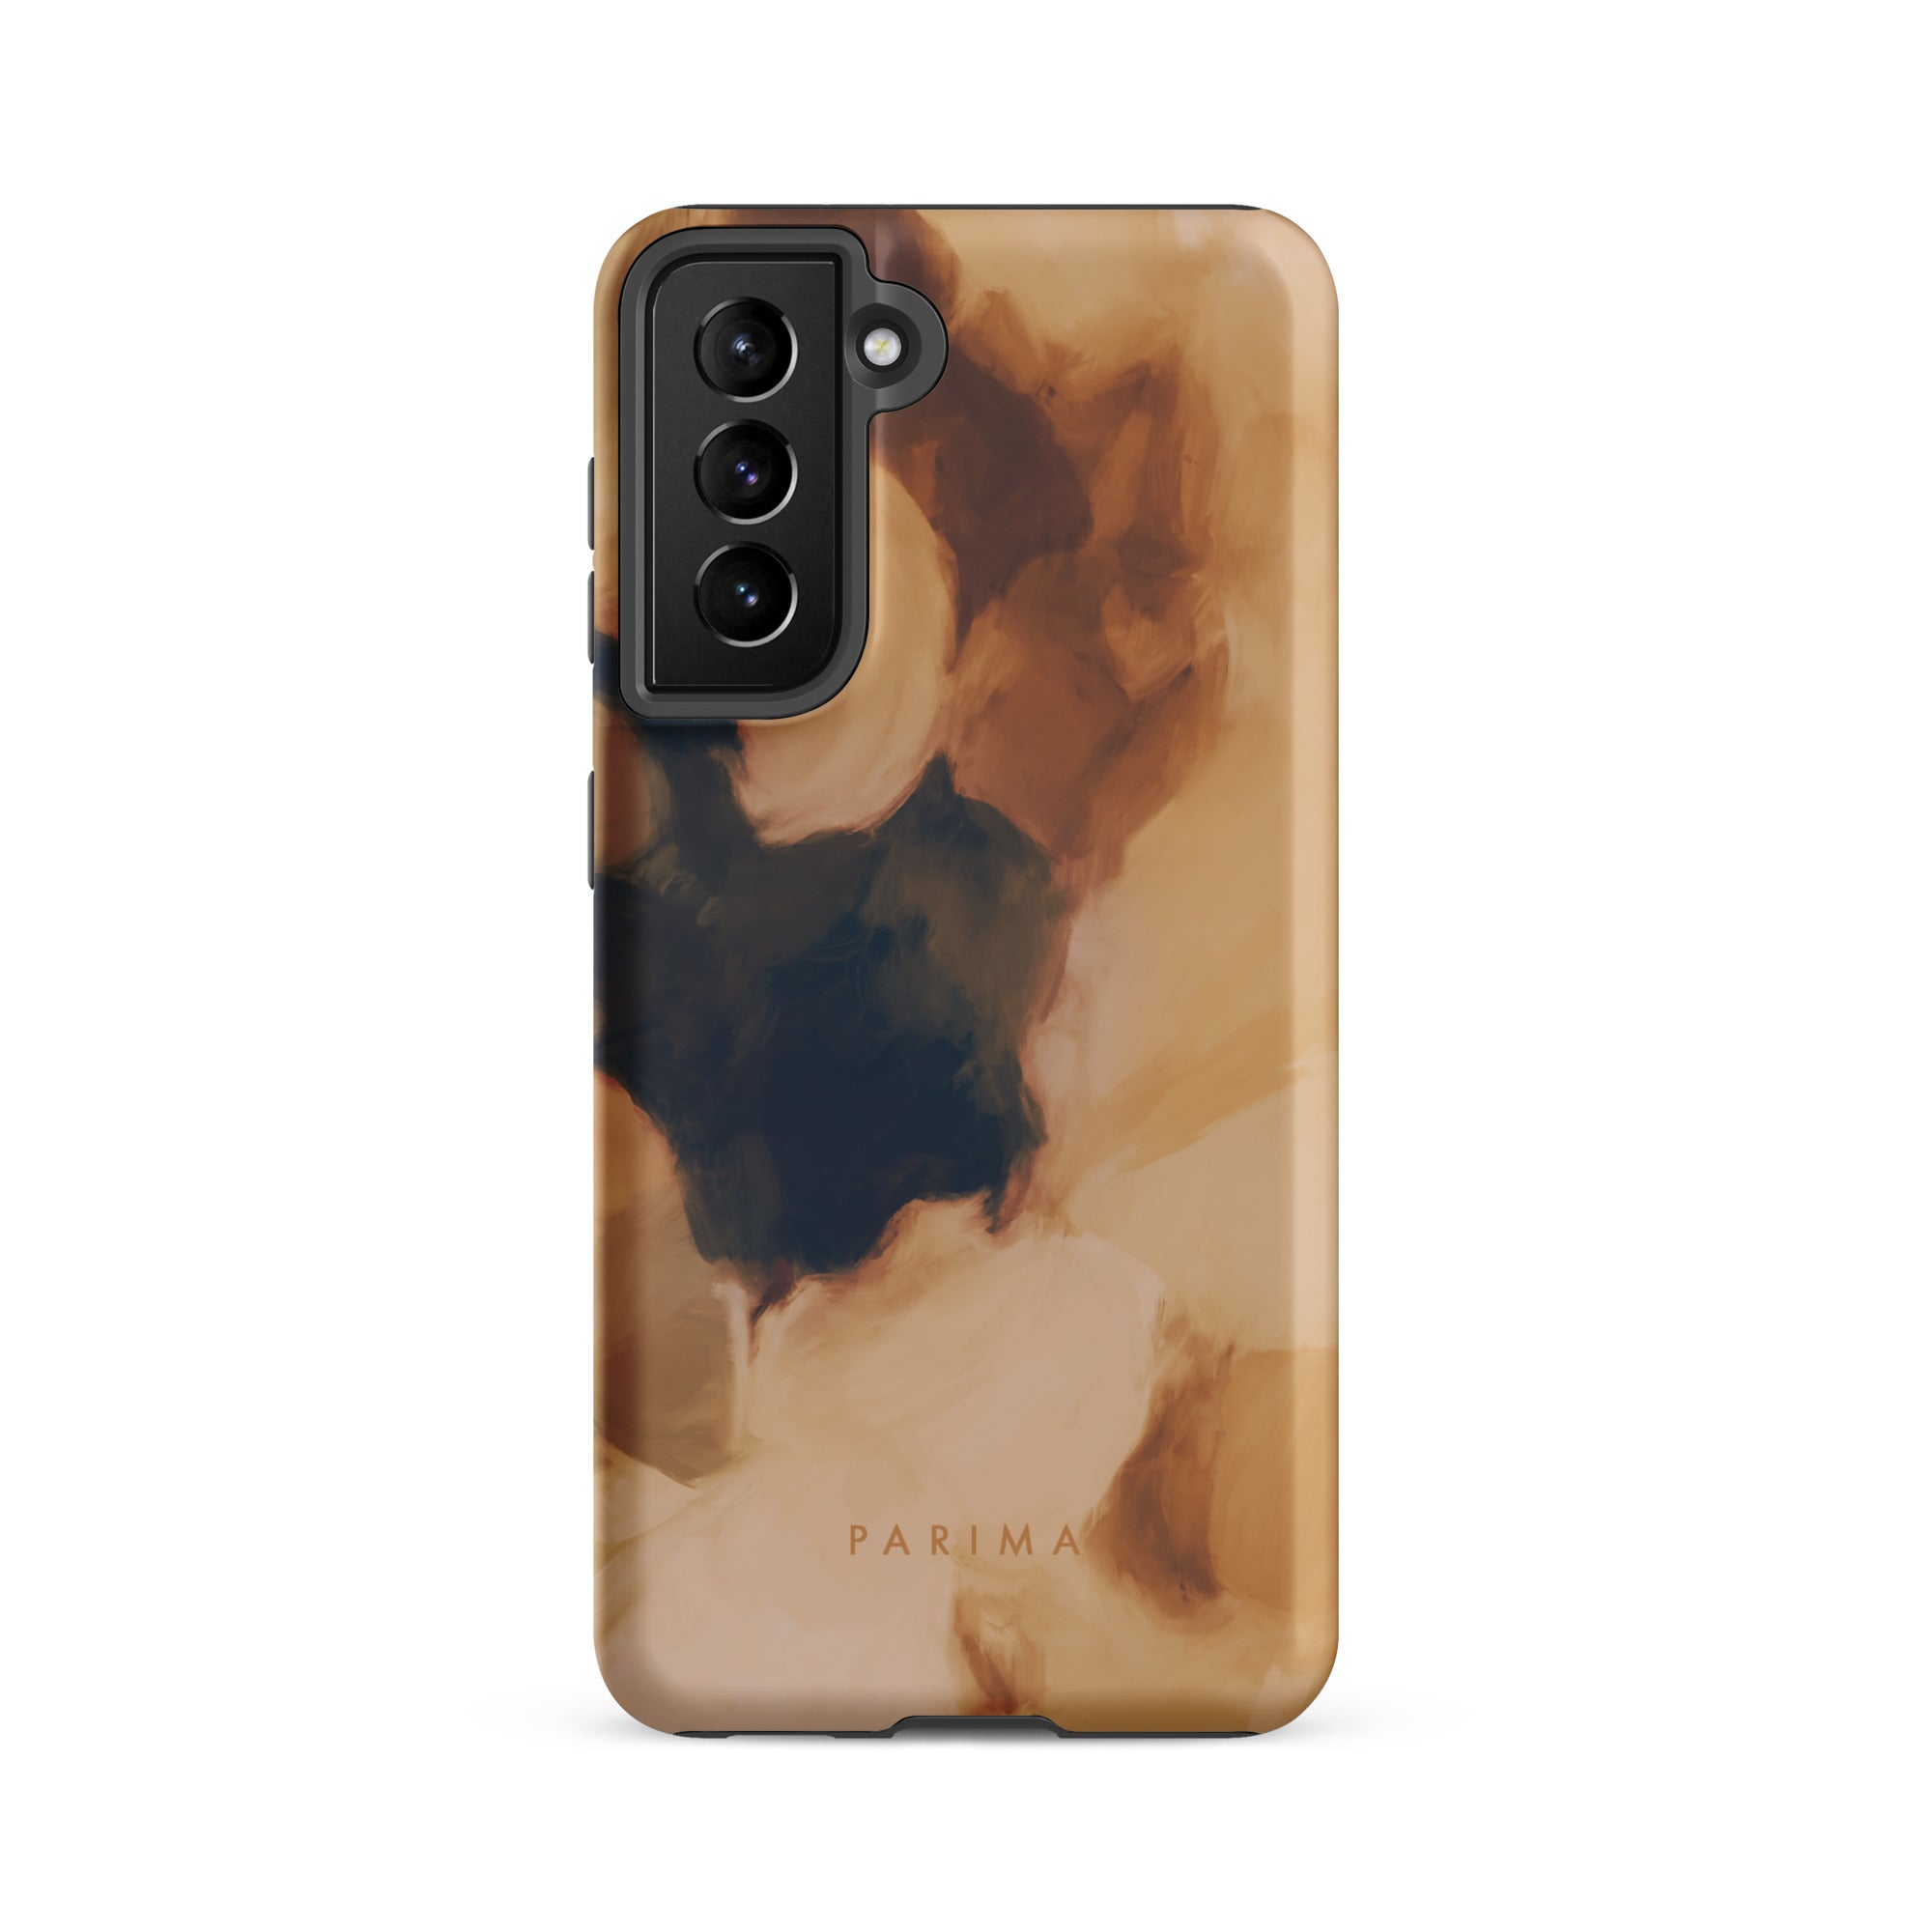 Clay, brown and tan color abstract art on Samsung Galaxy s21 FE tough case by Parima Studio